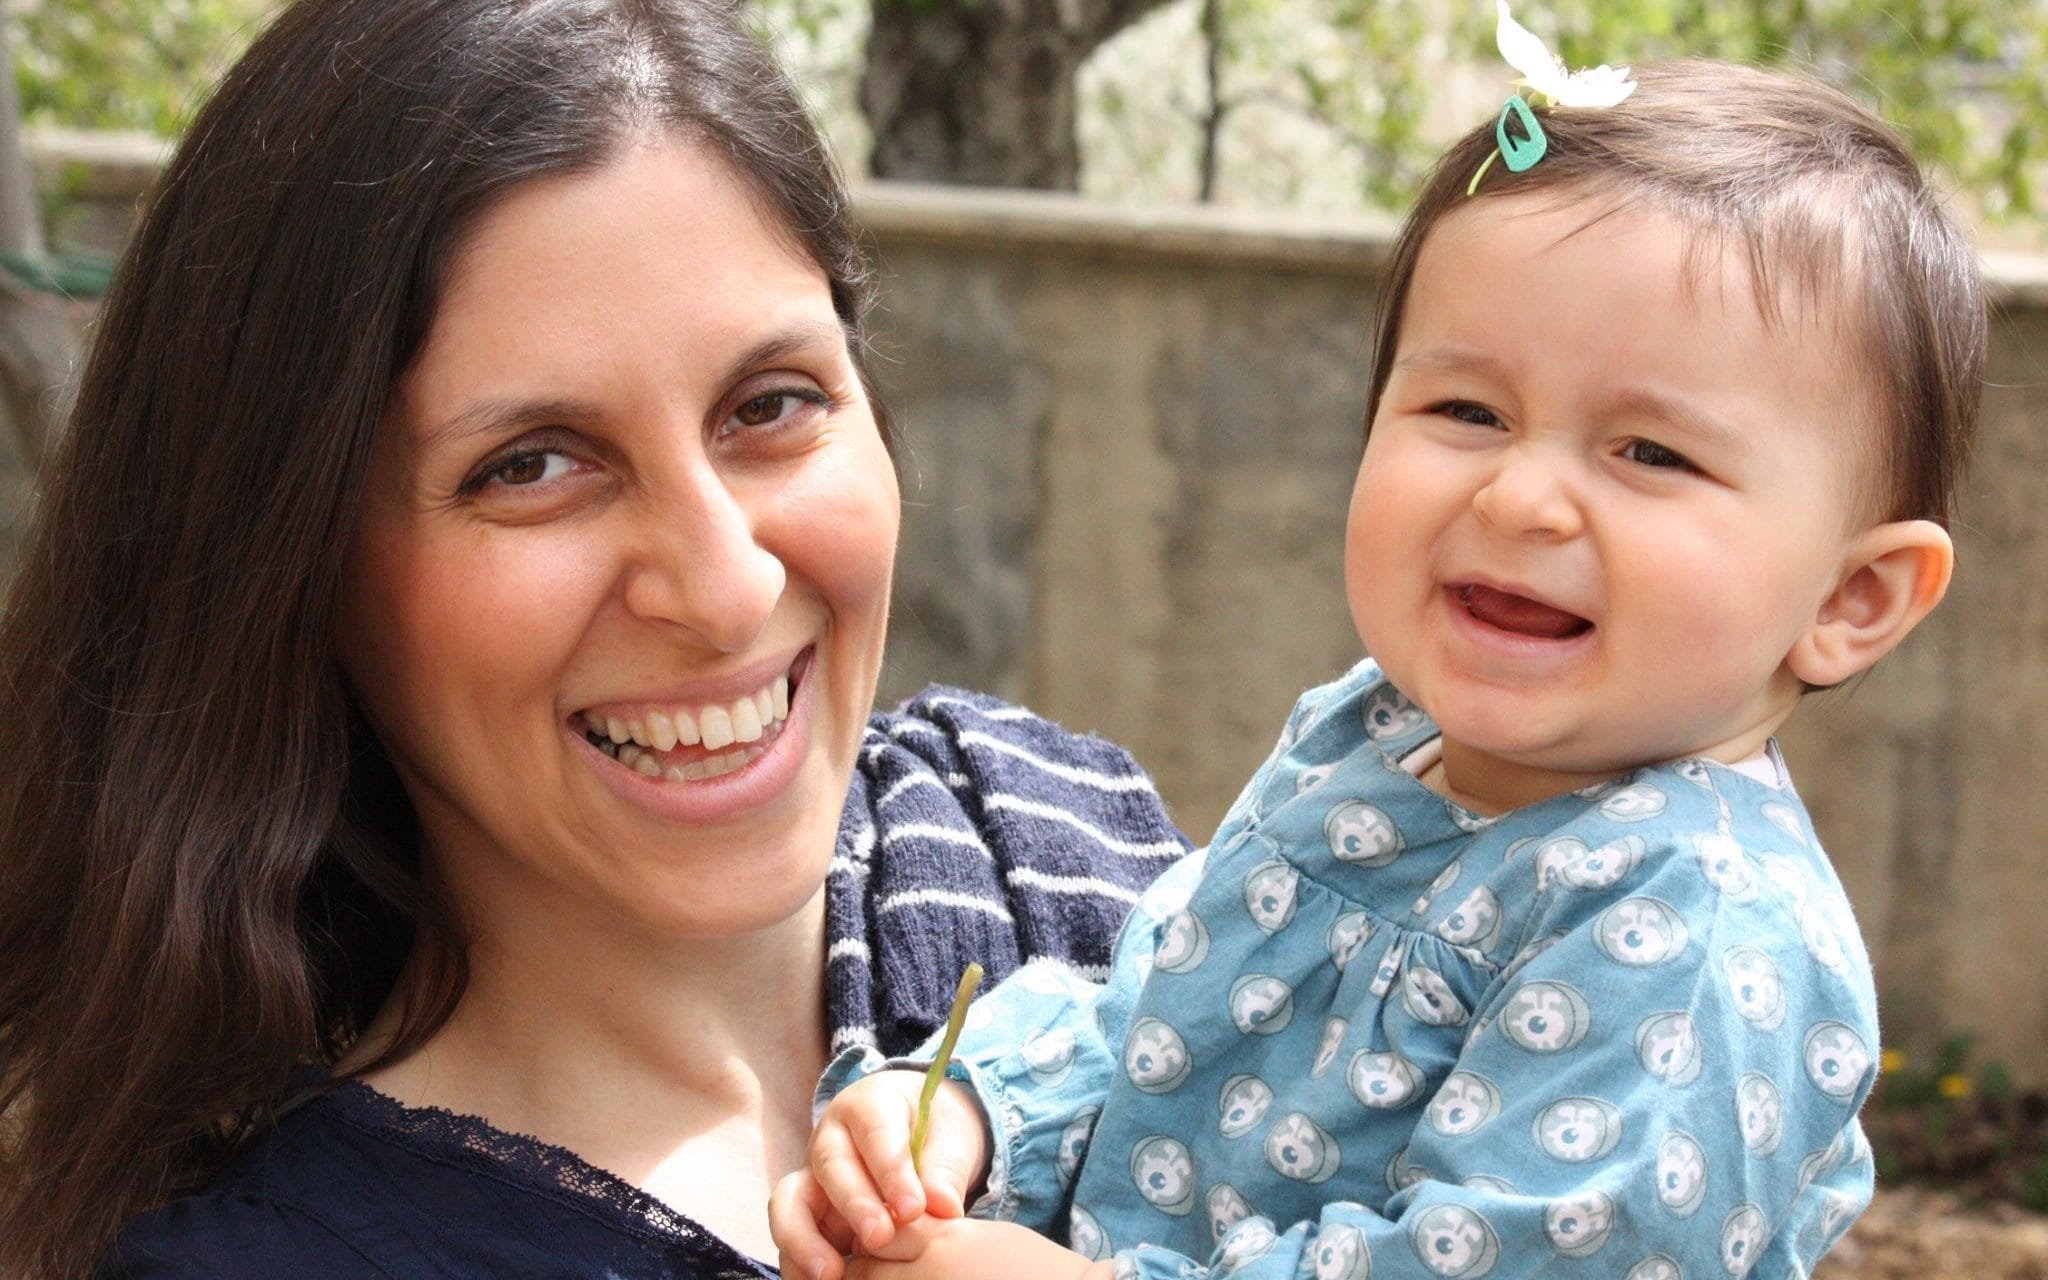 <strong>Nazanin Zaghari-Ratcliffe, seen here with her daughter Gabriella, has been&nbsp;imprisoned in Iran since 2016</strong>